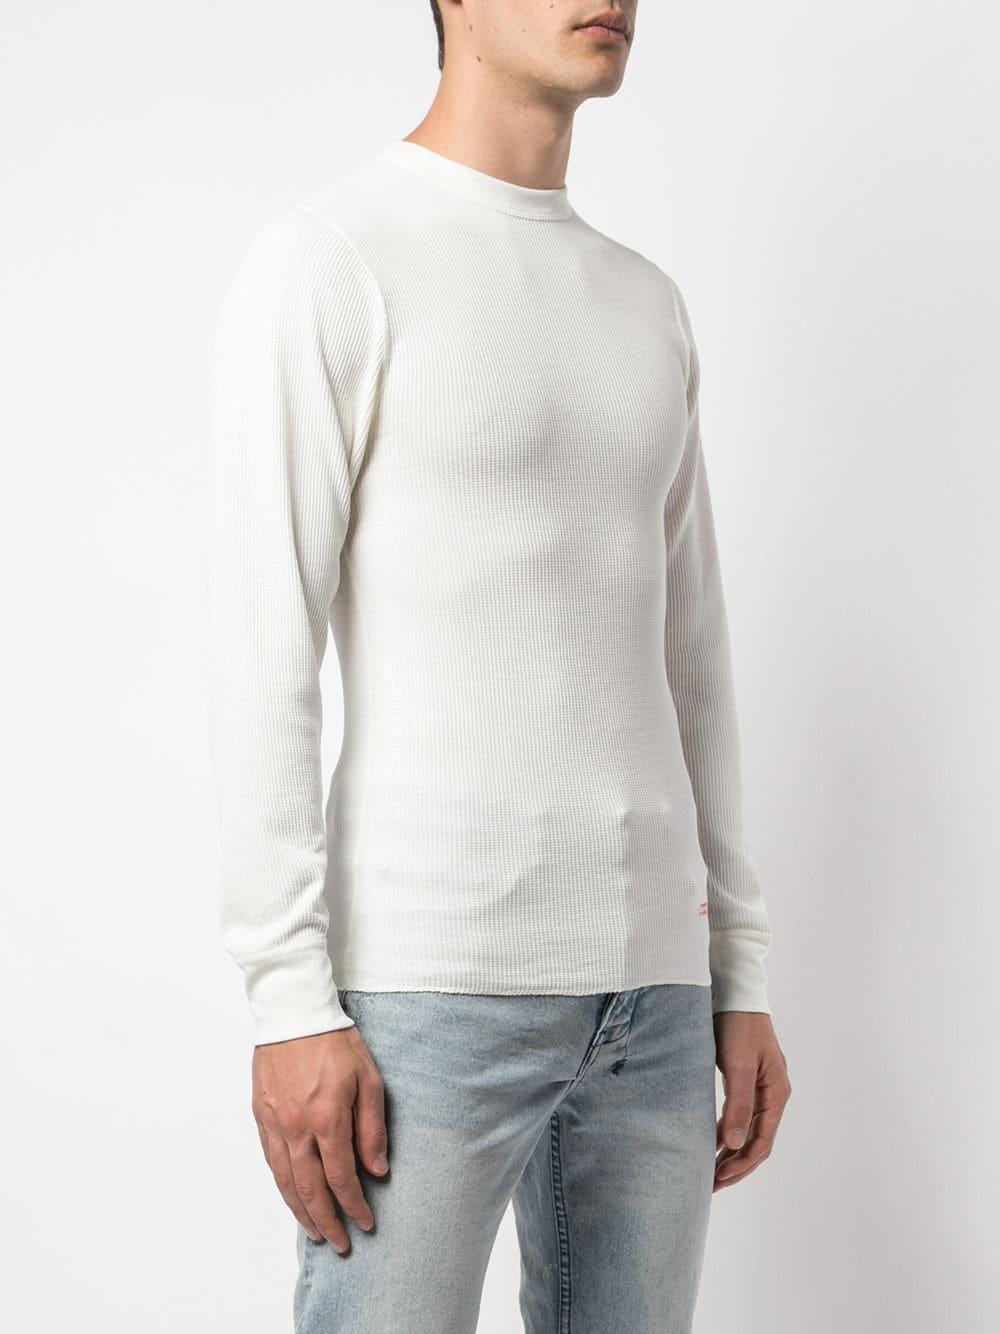 Supreme Hanes Thermal T-shirt in White for Men - Lyst